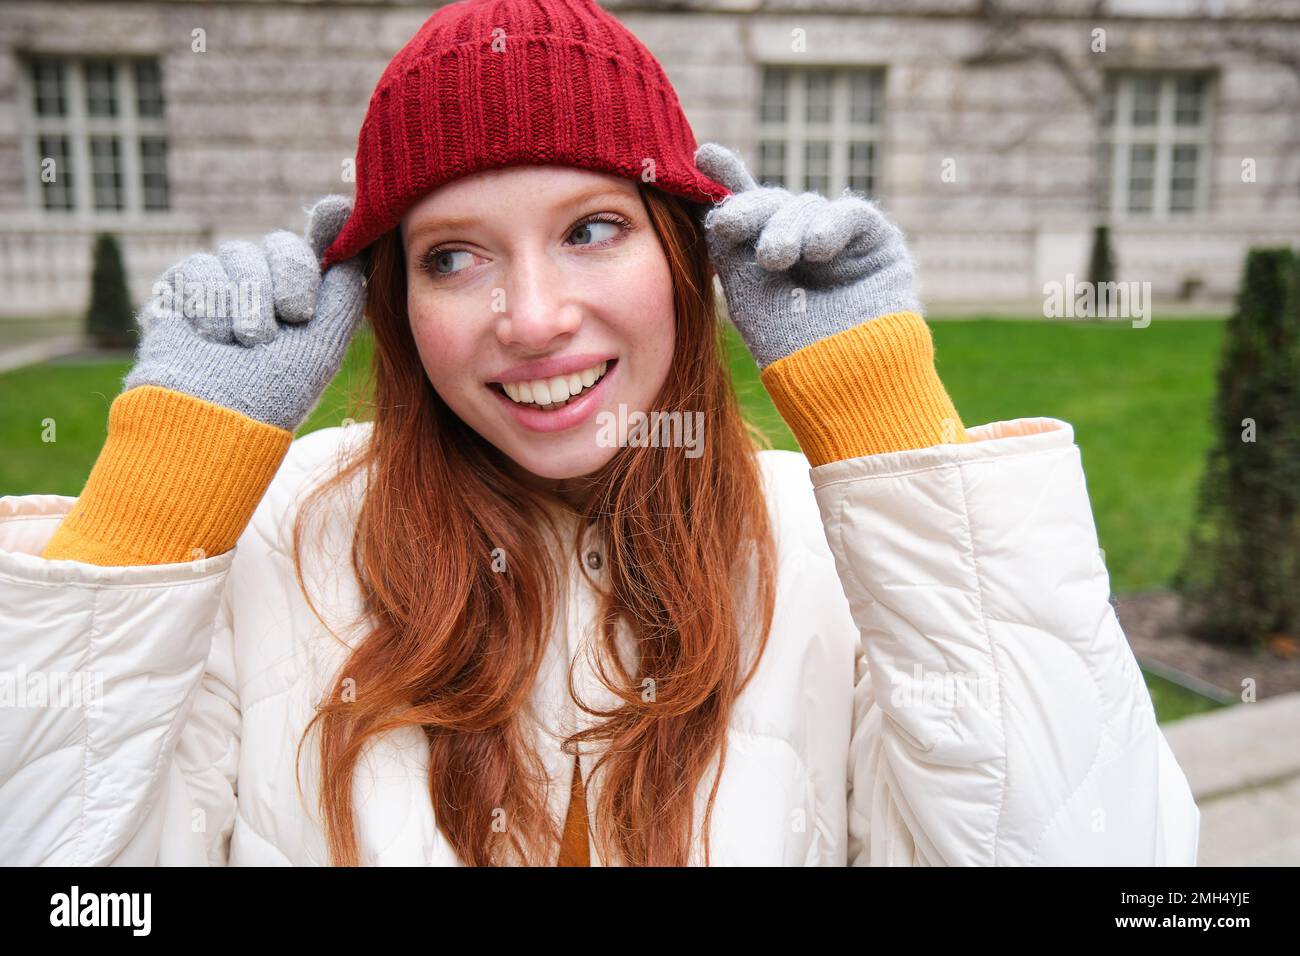 Close up portrait of beautiful redhead woman in red knitted hat, warm gloves, smiling and looking happy at camera, sitting in park Stock Photo